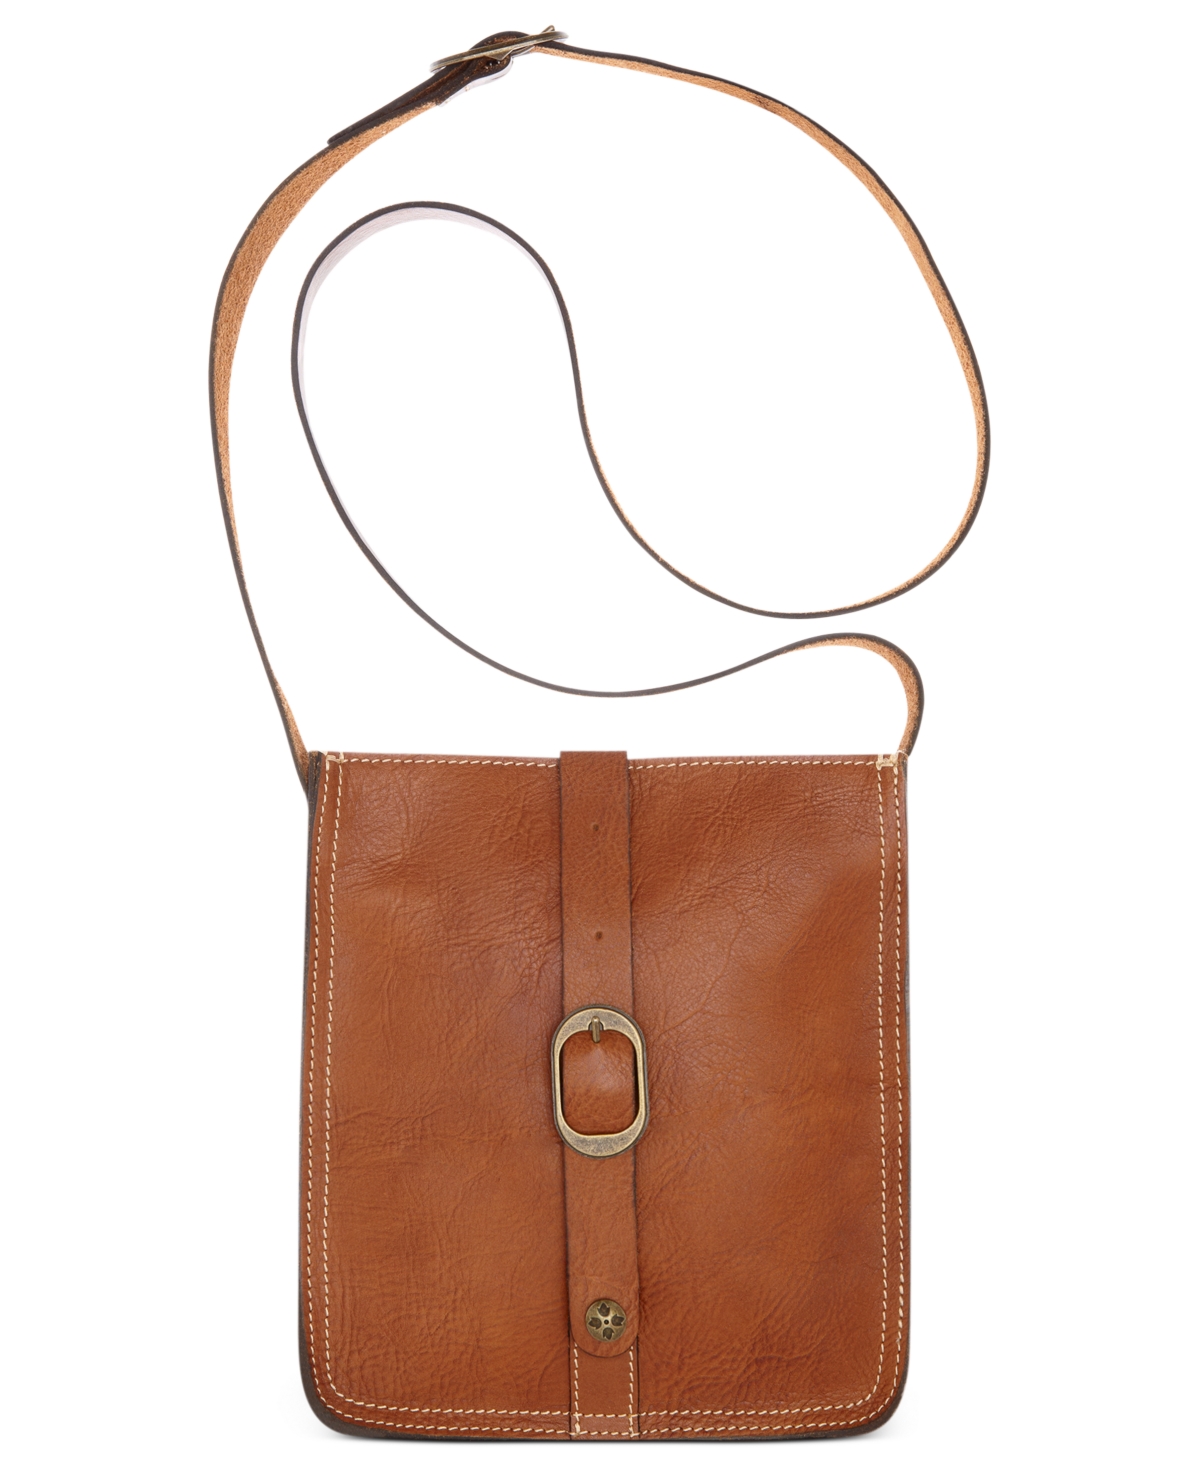 UPC 887986000220 product image for Patricia Nash Pouch Smooth Leather Crossbody | upcitemdb.com